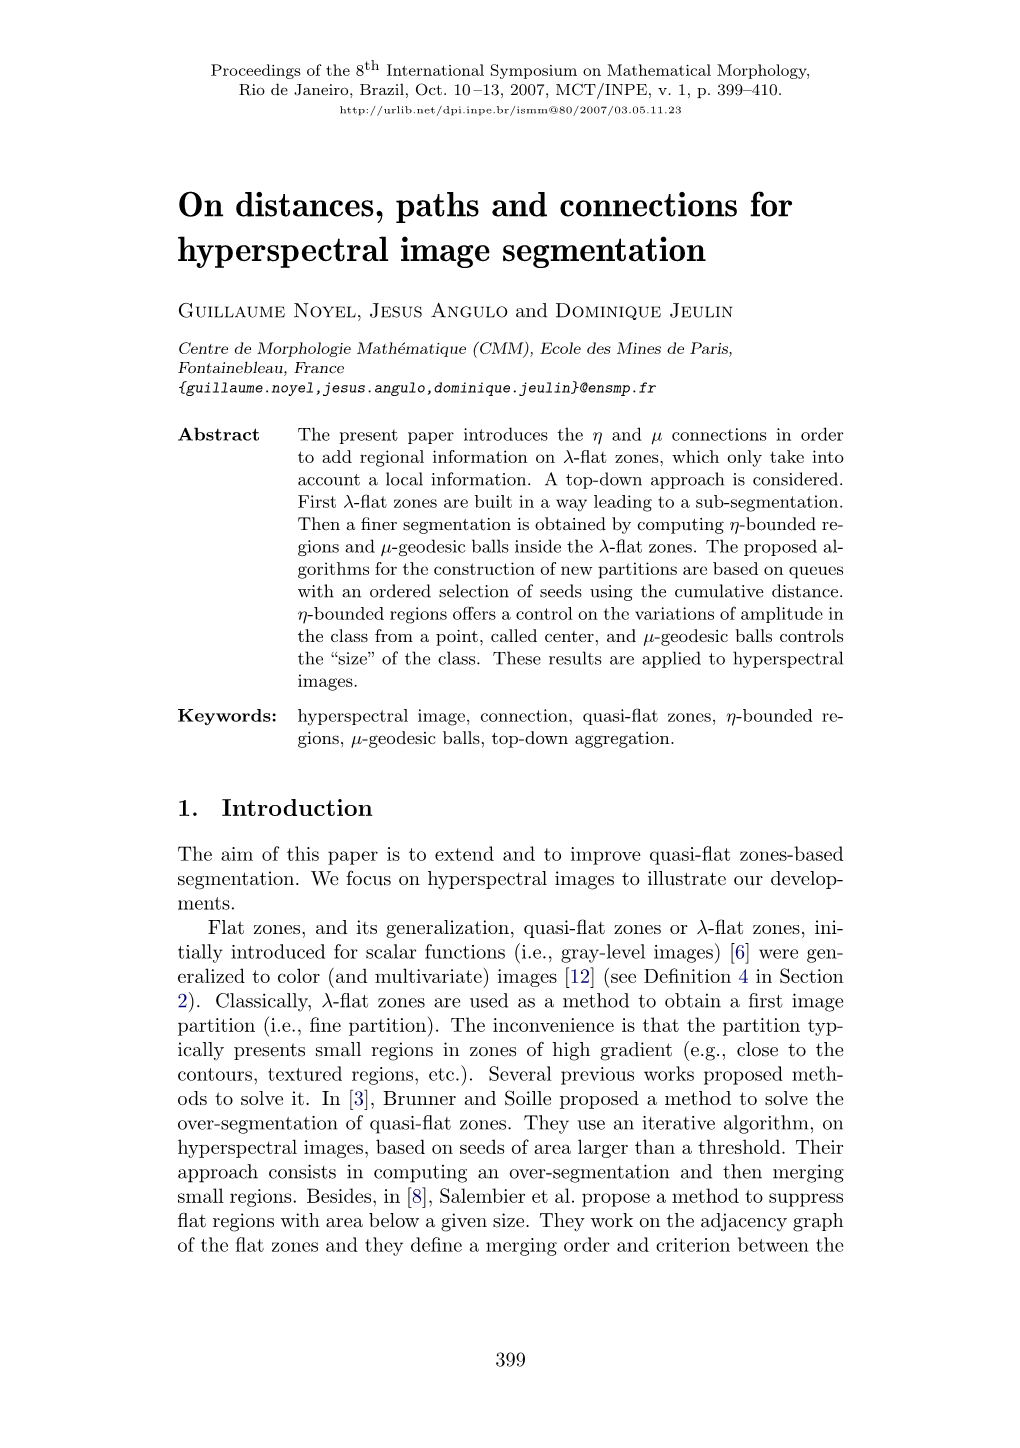 On Distances, Paths and Connections for Hyperspectral Image Segmentation